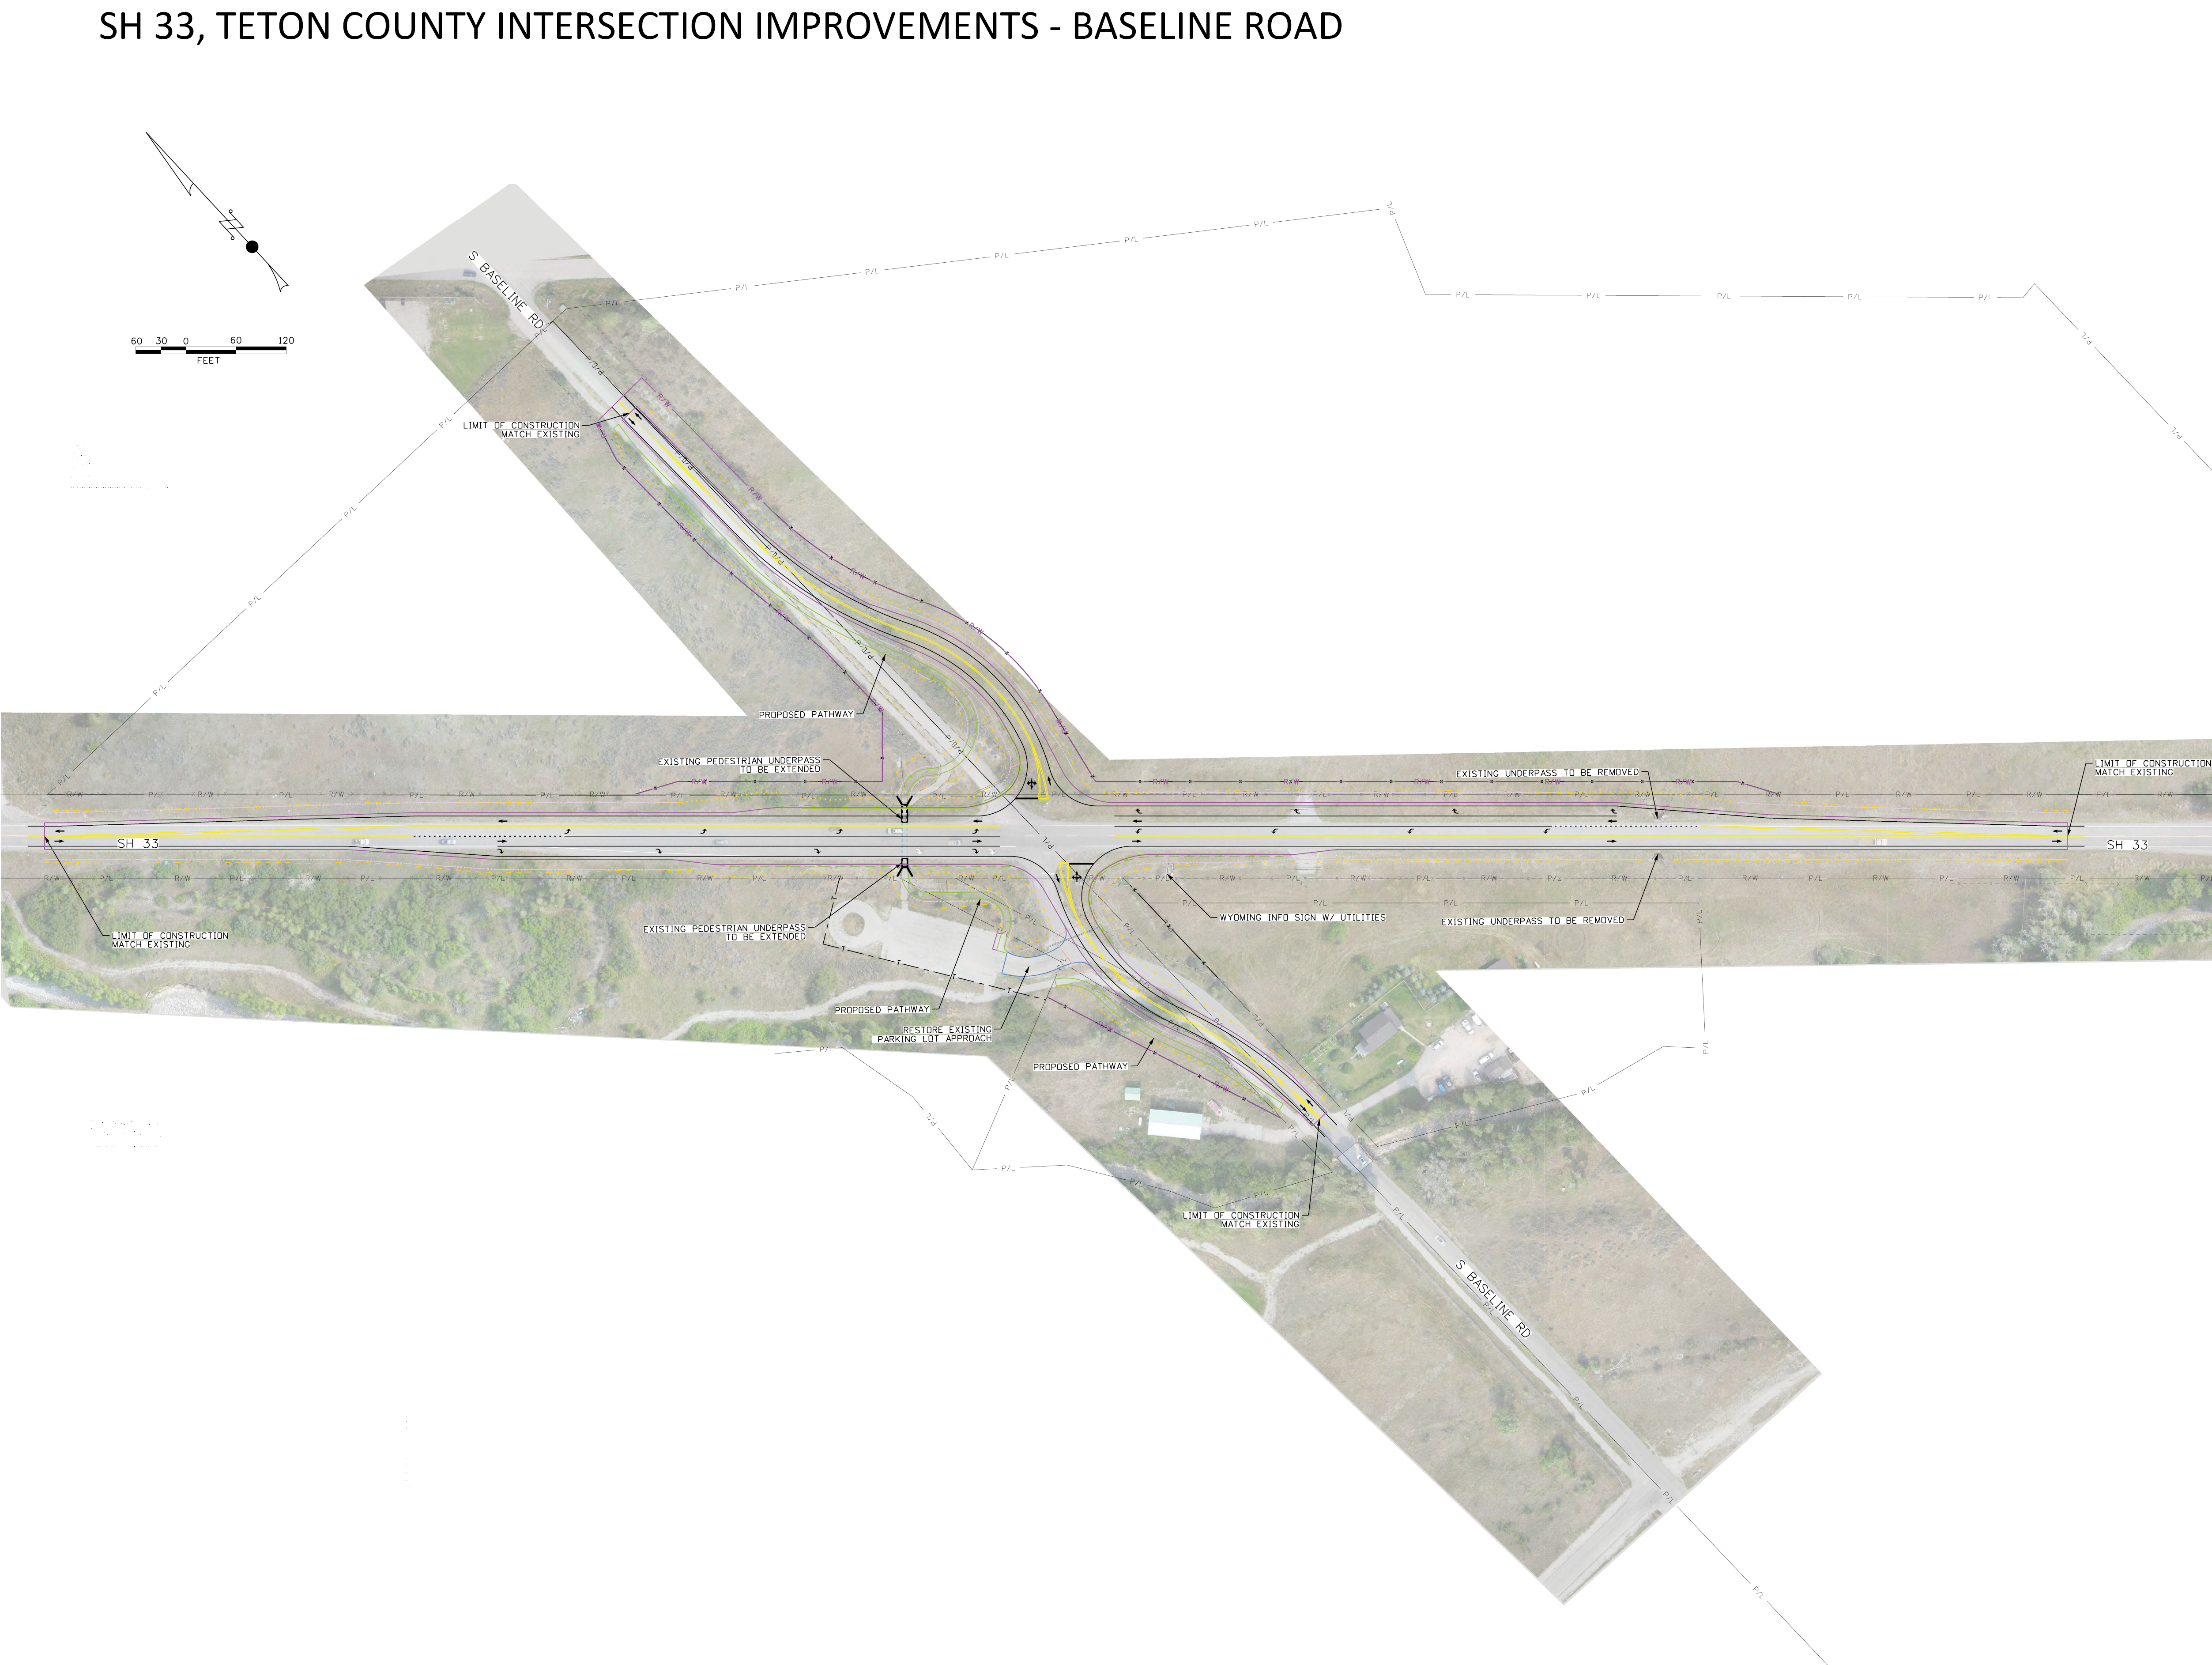 Schematic showing proposed turn lane re-alignments and pathway re-alignments at ID-33 and Baseline Road.